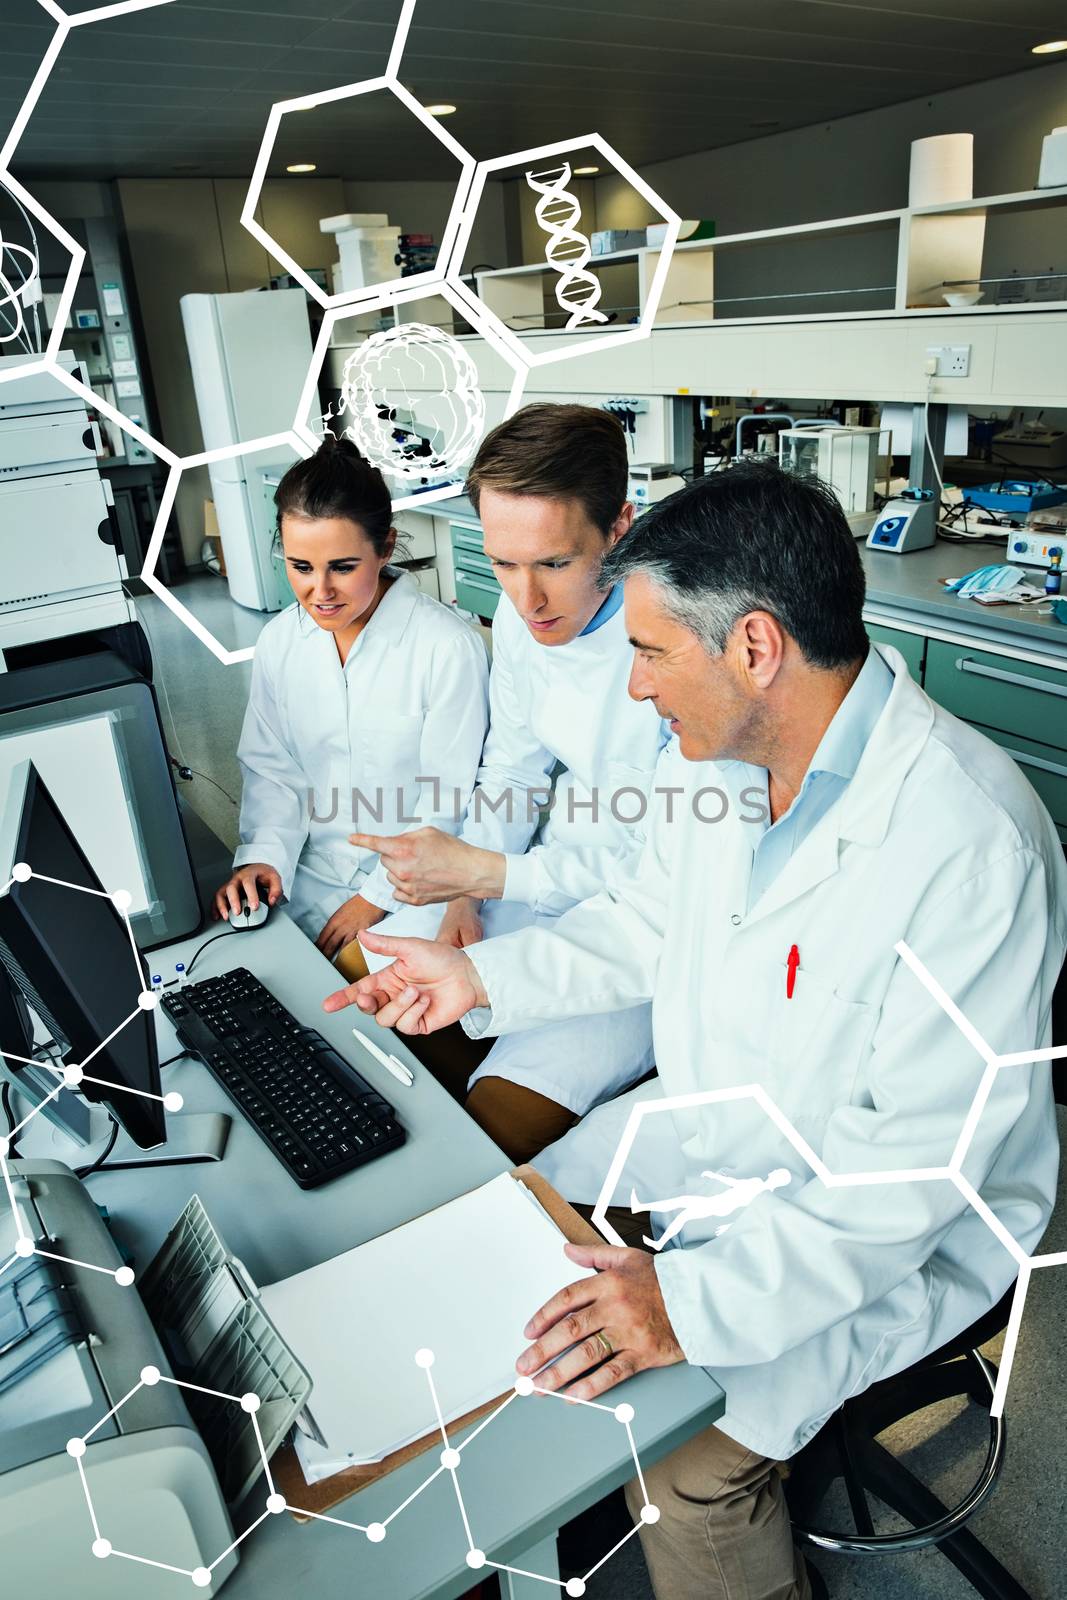 Science and medical graphic against team of scientists working together 